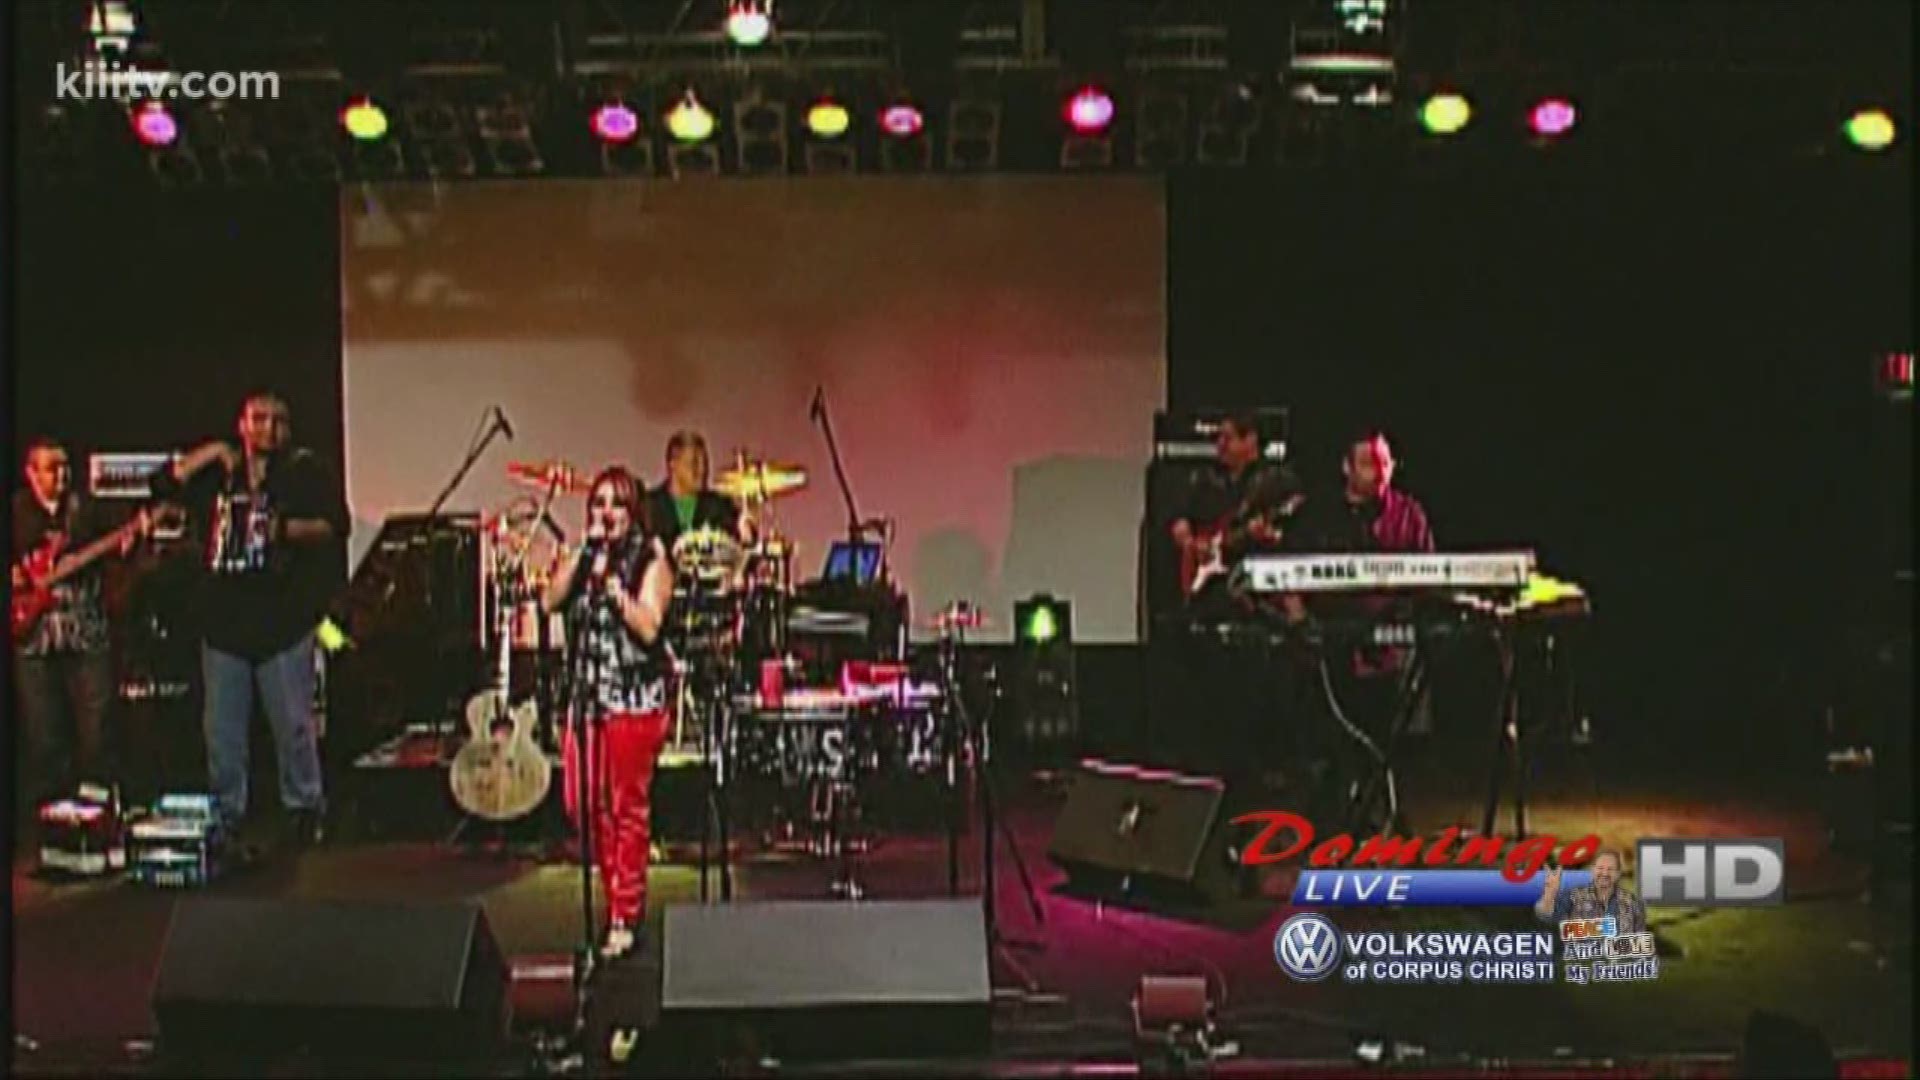 Shelly Lares "Esa Quimica Que Tienes" performance courtesy of Q-Productions, on Domingo Live.